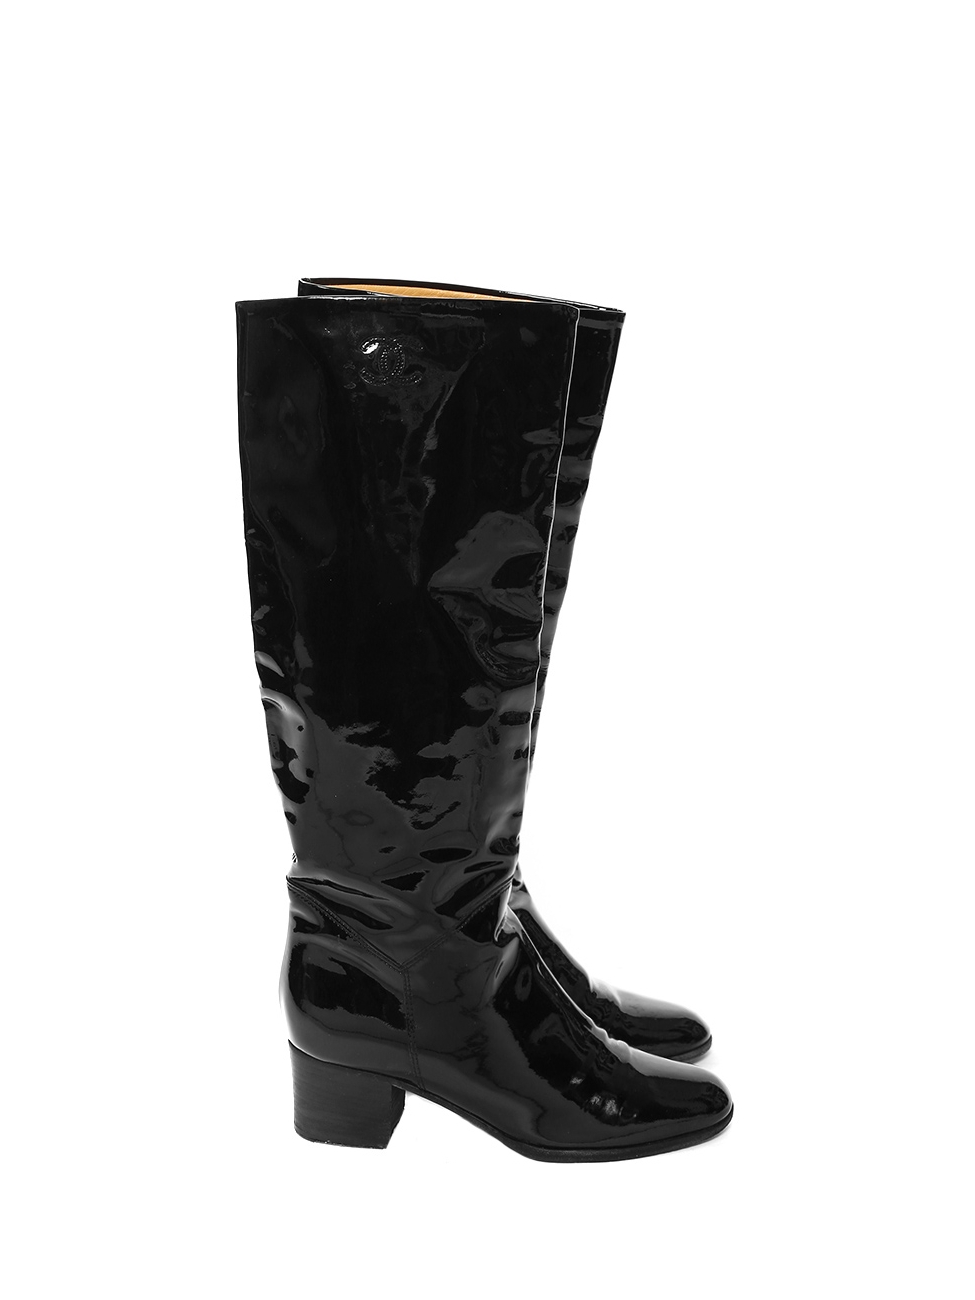 Boutique CHANEL Black patent leather knee high boots Retail price €1300  Size 